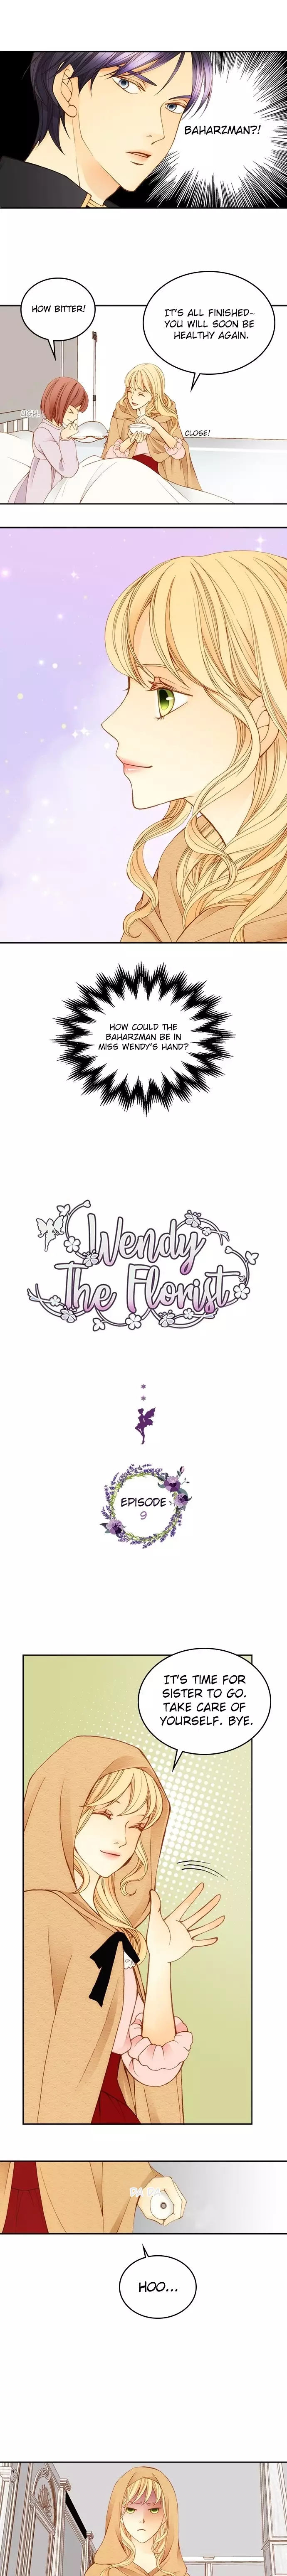 Wendy The Florist - 9 page 1